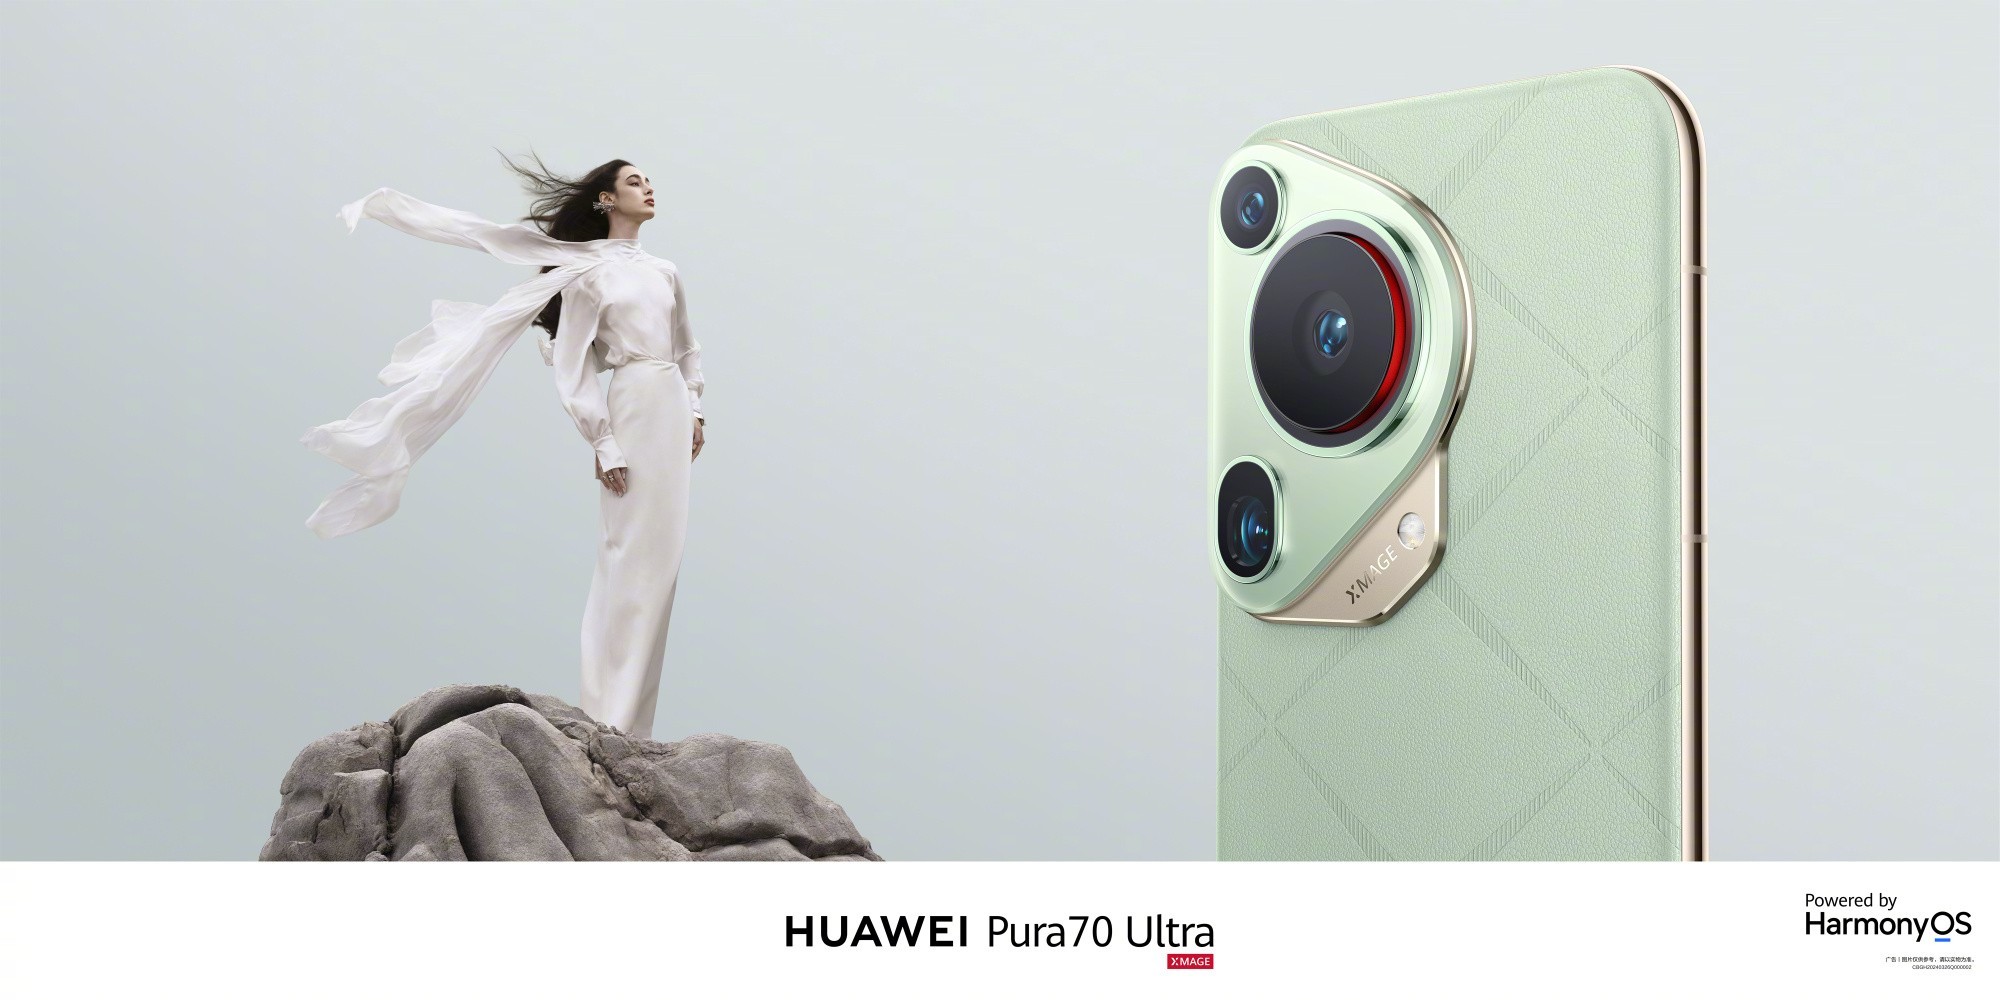  Do you want to buy Huawei from Pura70 or Mate70? Wait, the party has hope this time